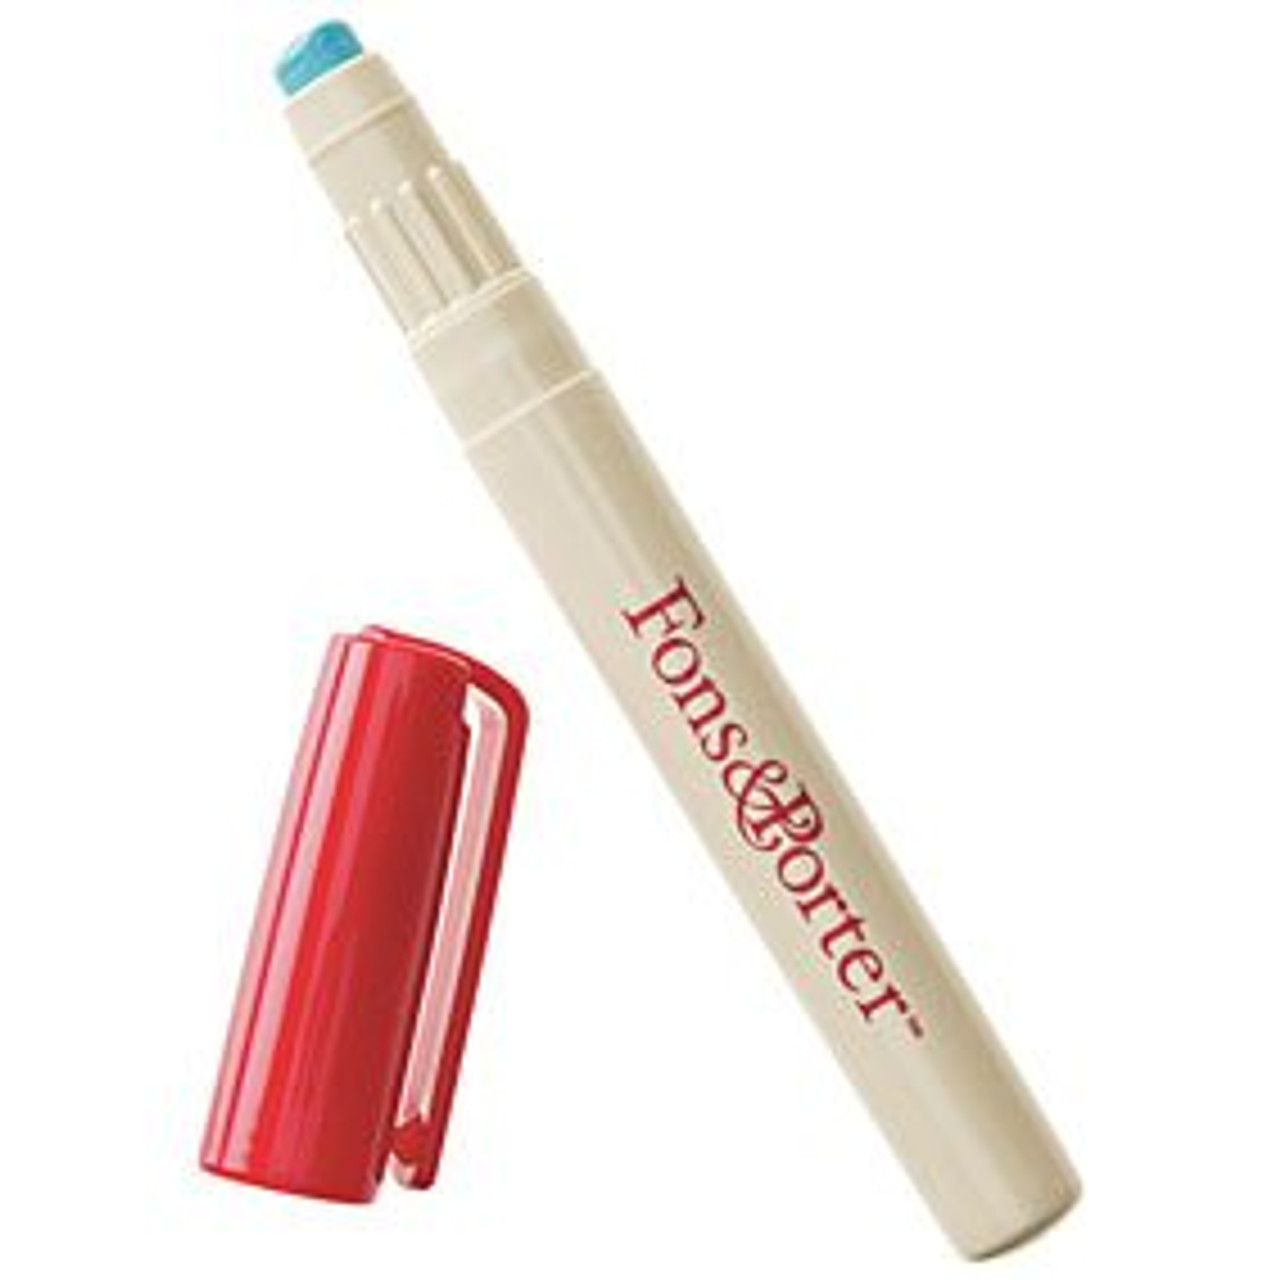 Water Soluble Fabric Glue Pen - Fons & Porter - The Sewing Place